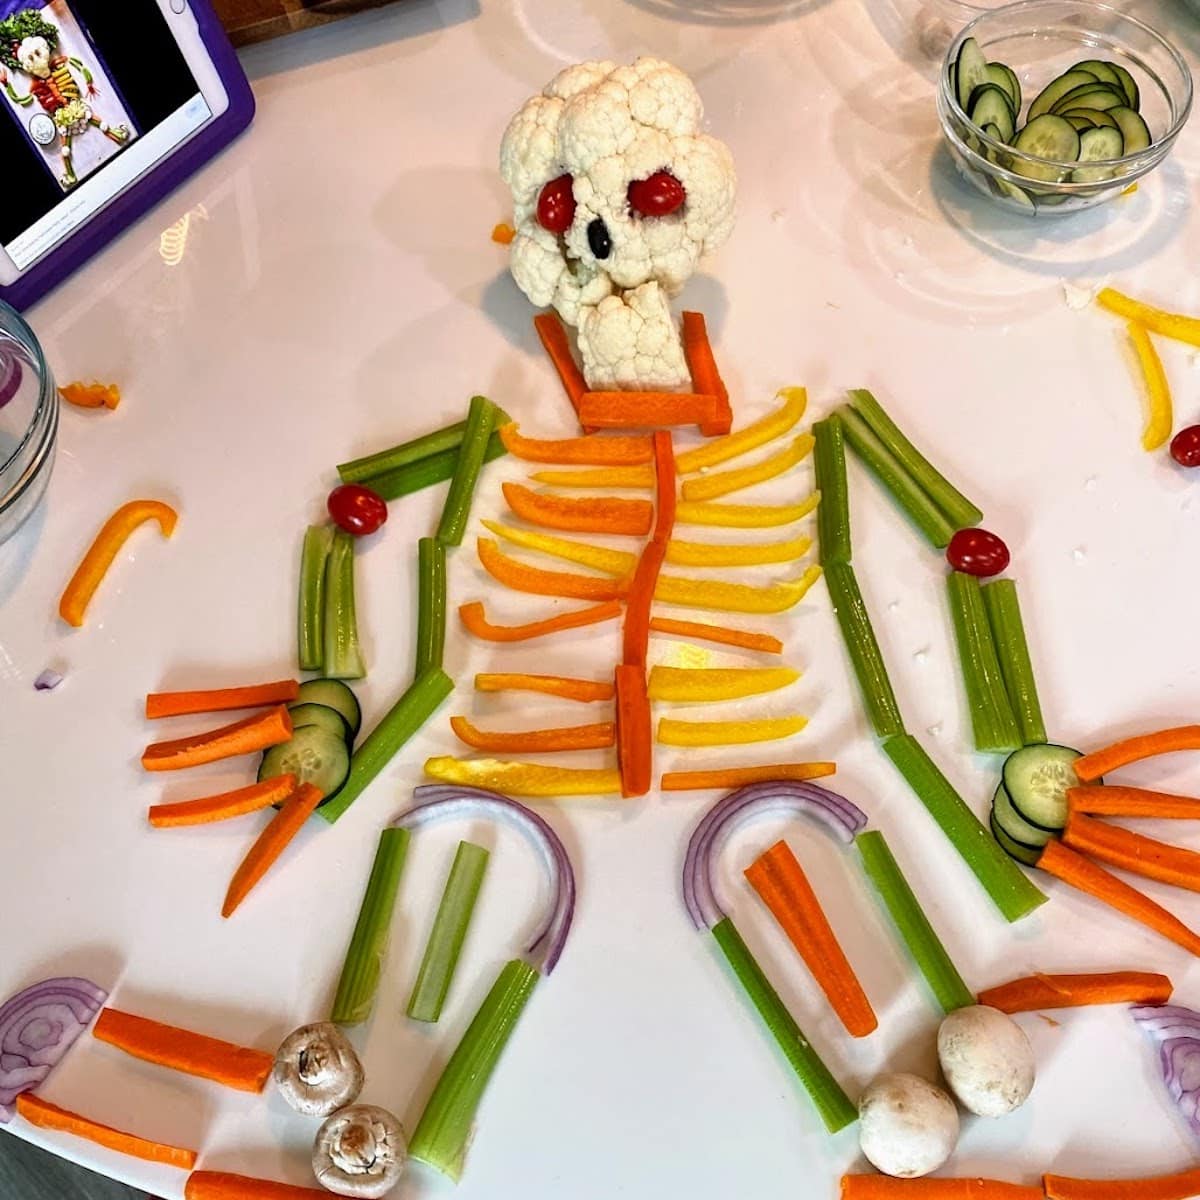 skeleton veggie tray with hands and feet